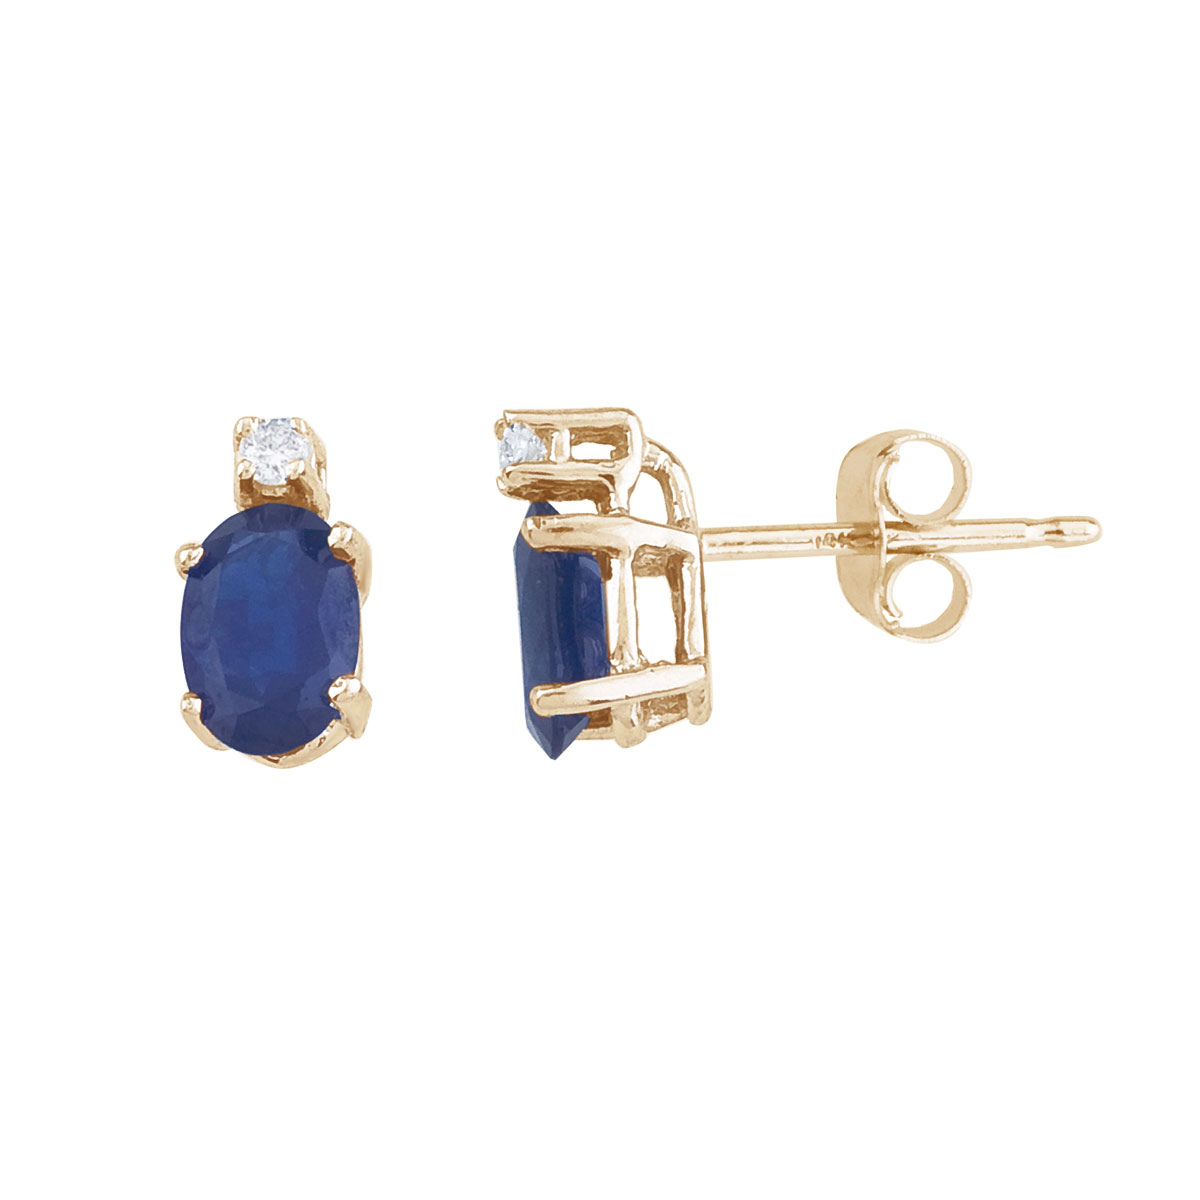 JCX2316: These 6x4 mm oval sapphire earrings are set in beautiful 14k yellow gold and feature .04 total carat diamonds.